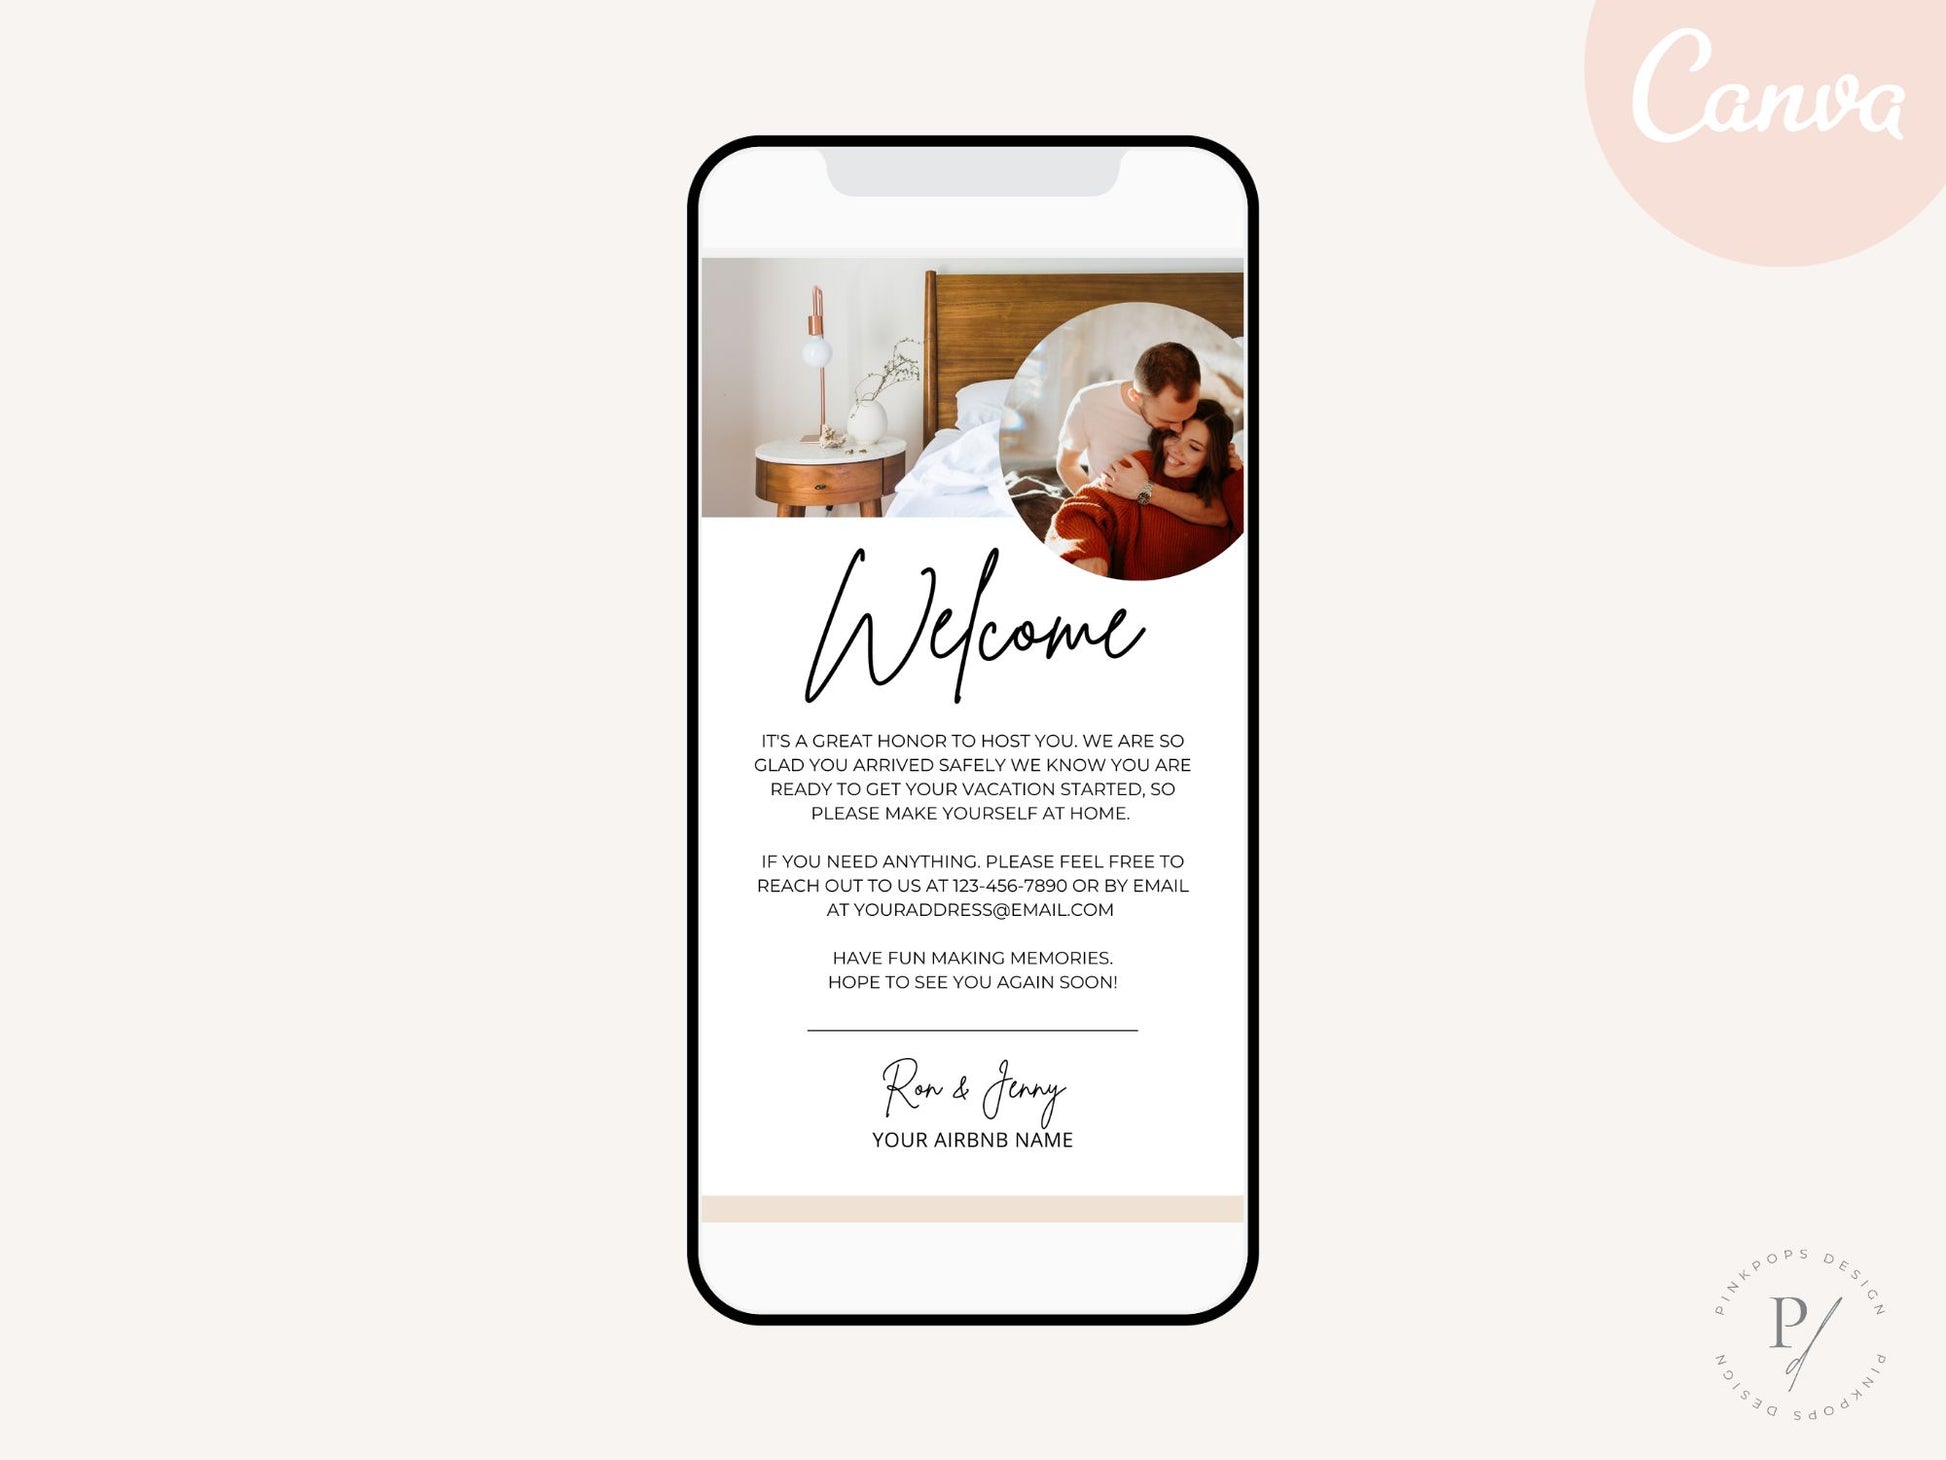 Textable Airbnb Welcome Message - Editable and digital template for a warm and inviting guest welcome in your vacation rental.